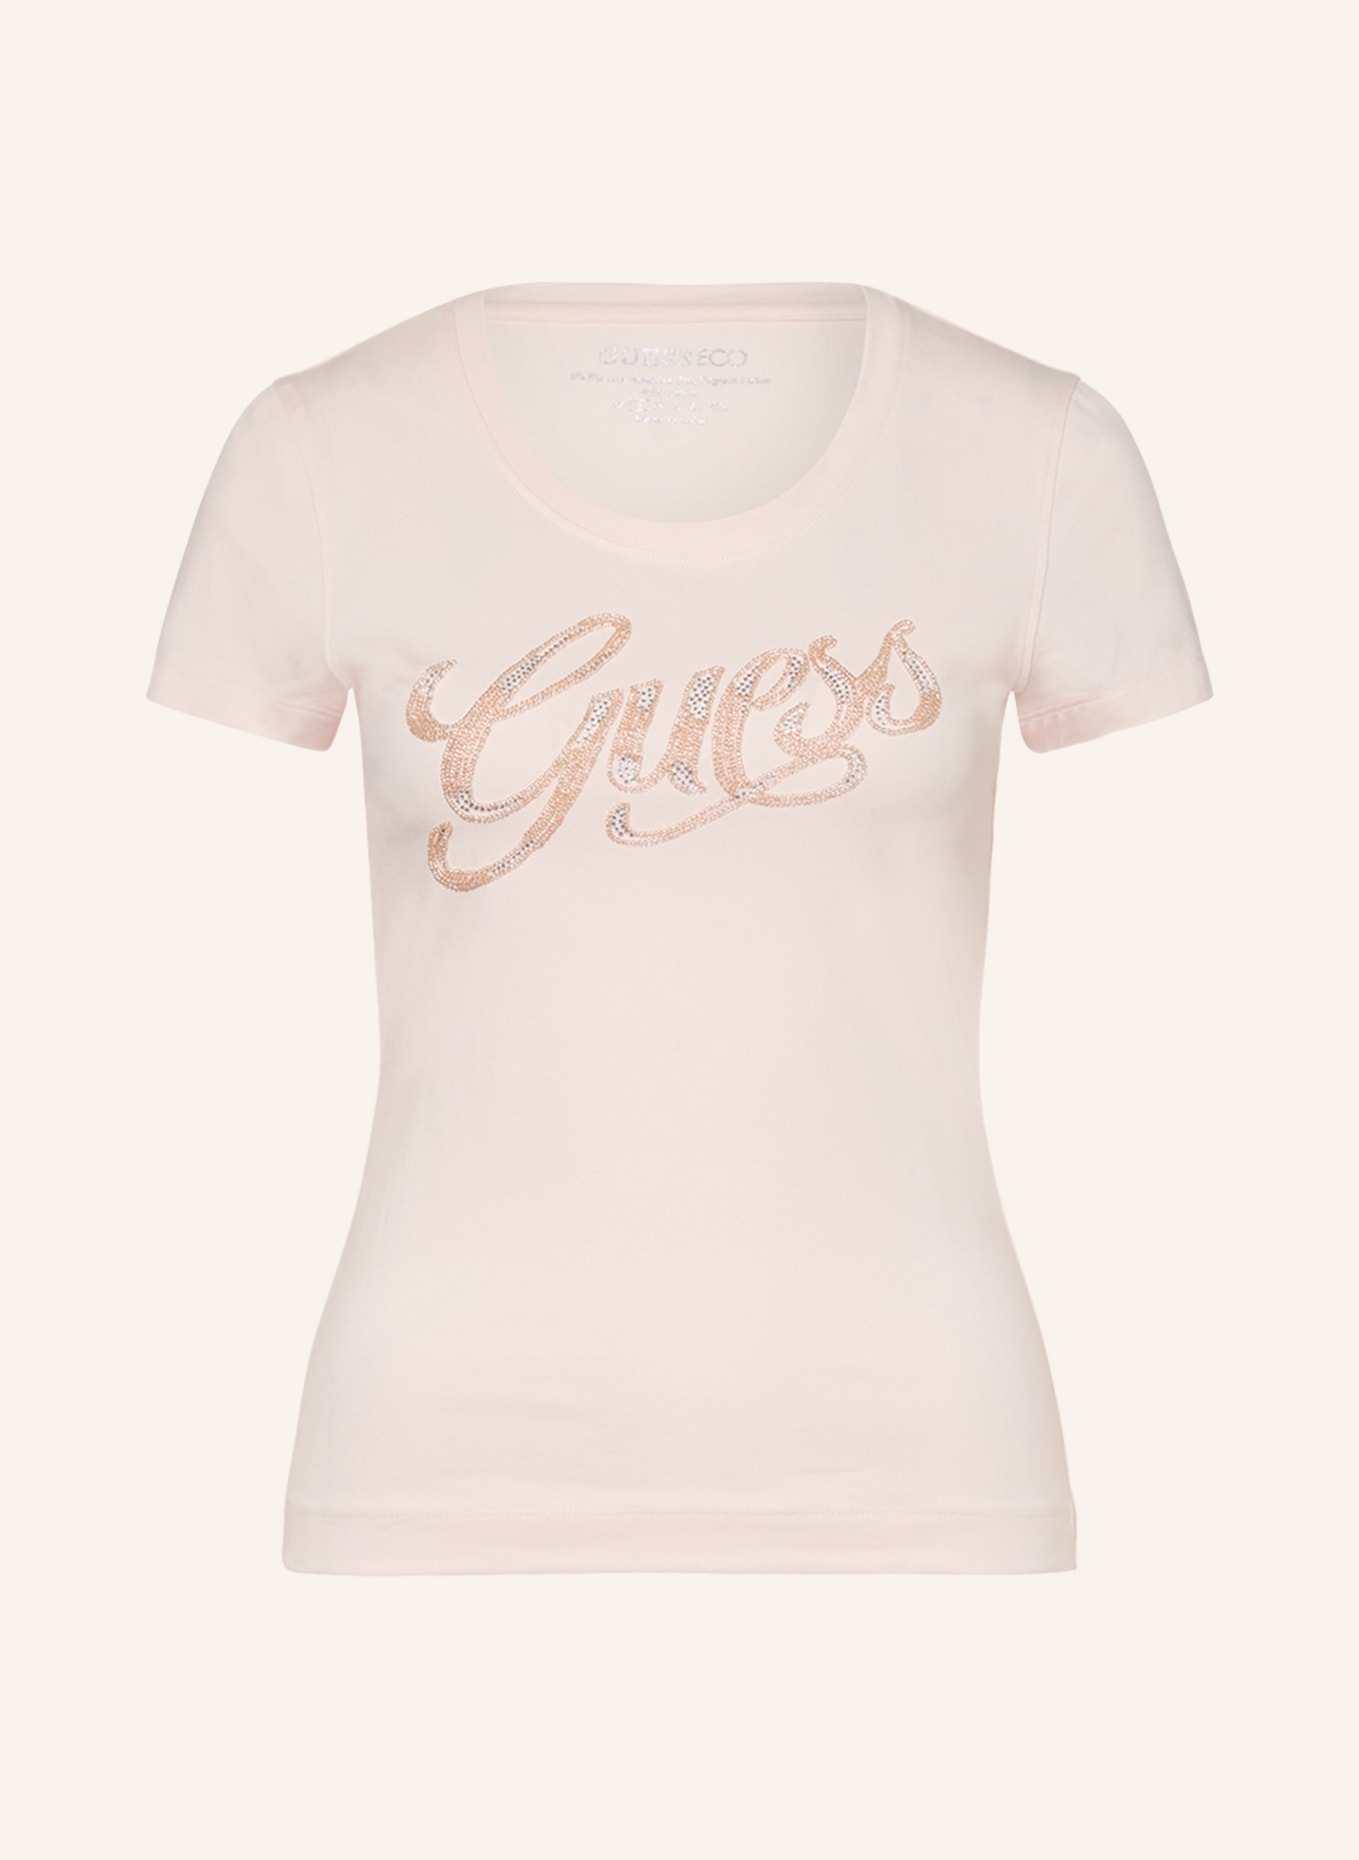 GUESS T-shirt SCRIPT with decorative beads, Color: PINK (Image 1)